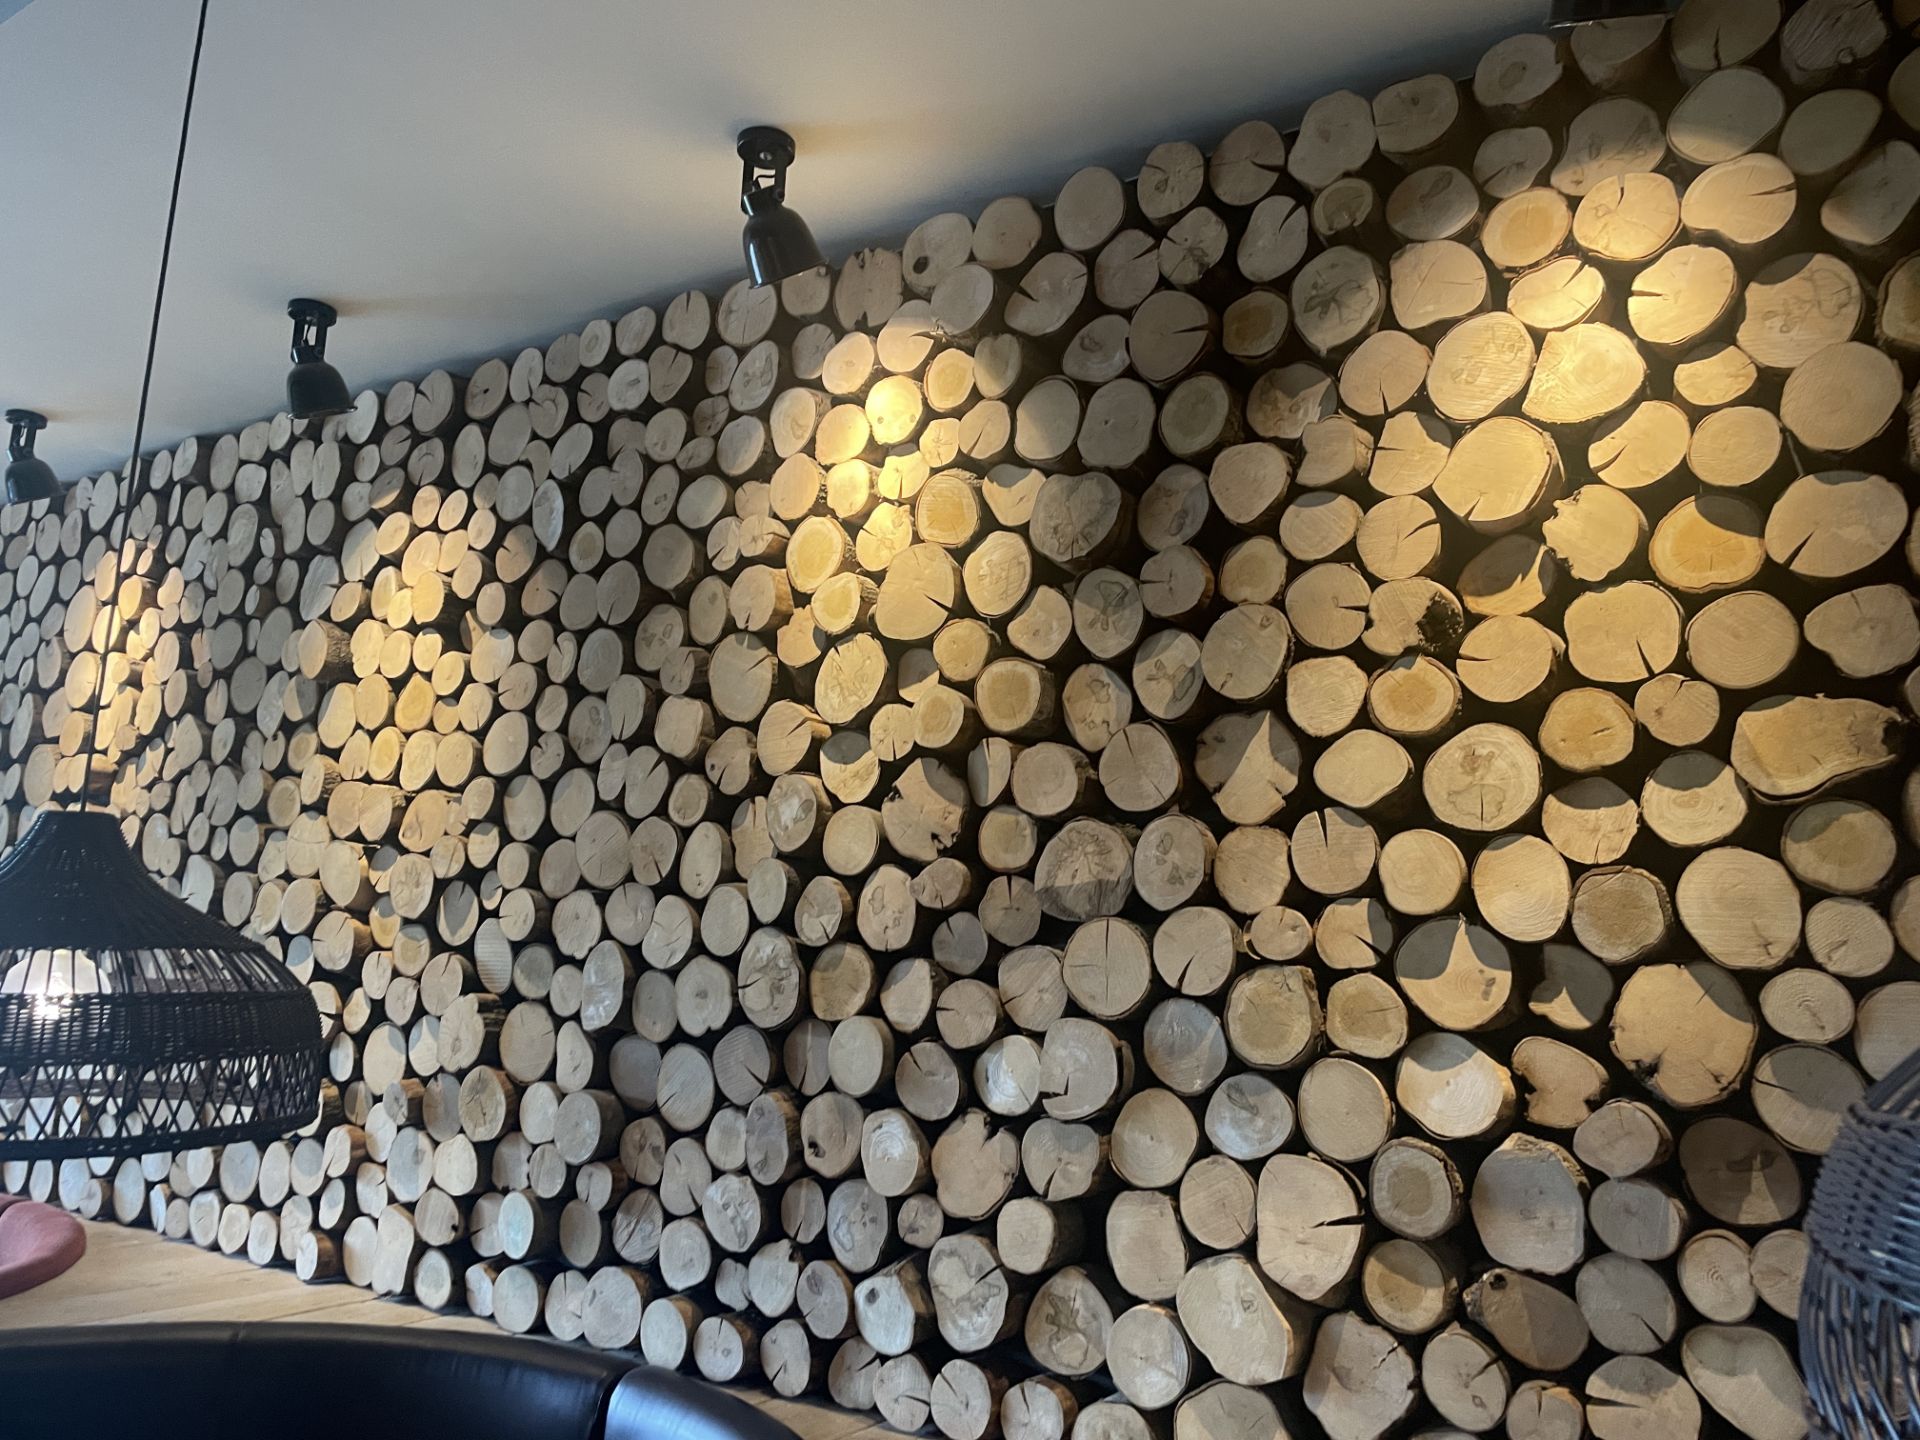 1 x Natural Log Wall Covering Decoration - Covers an Area of Approx 800 x 200 cms - Image 5 of 5